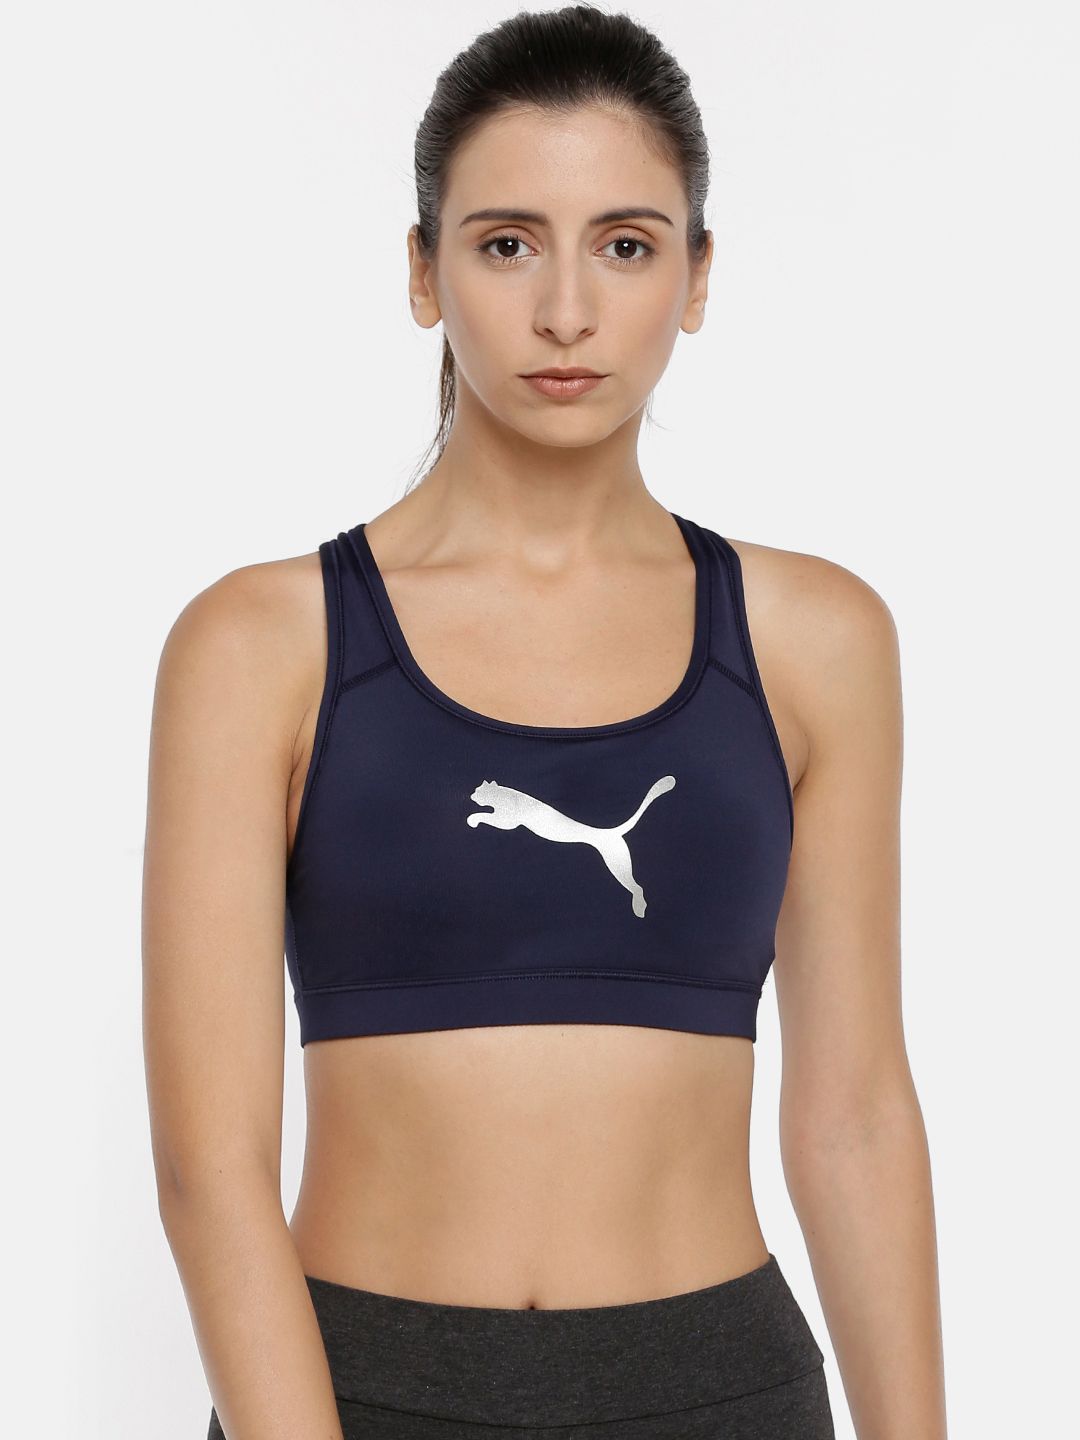 Puma Navy Solid Non-Wired Lightly Padded 4Keeps Sports Bra 51699803 Price in India